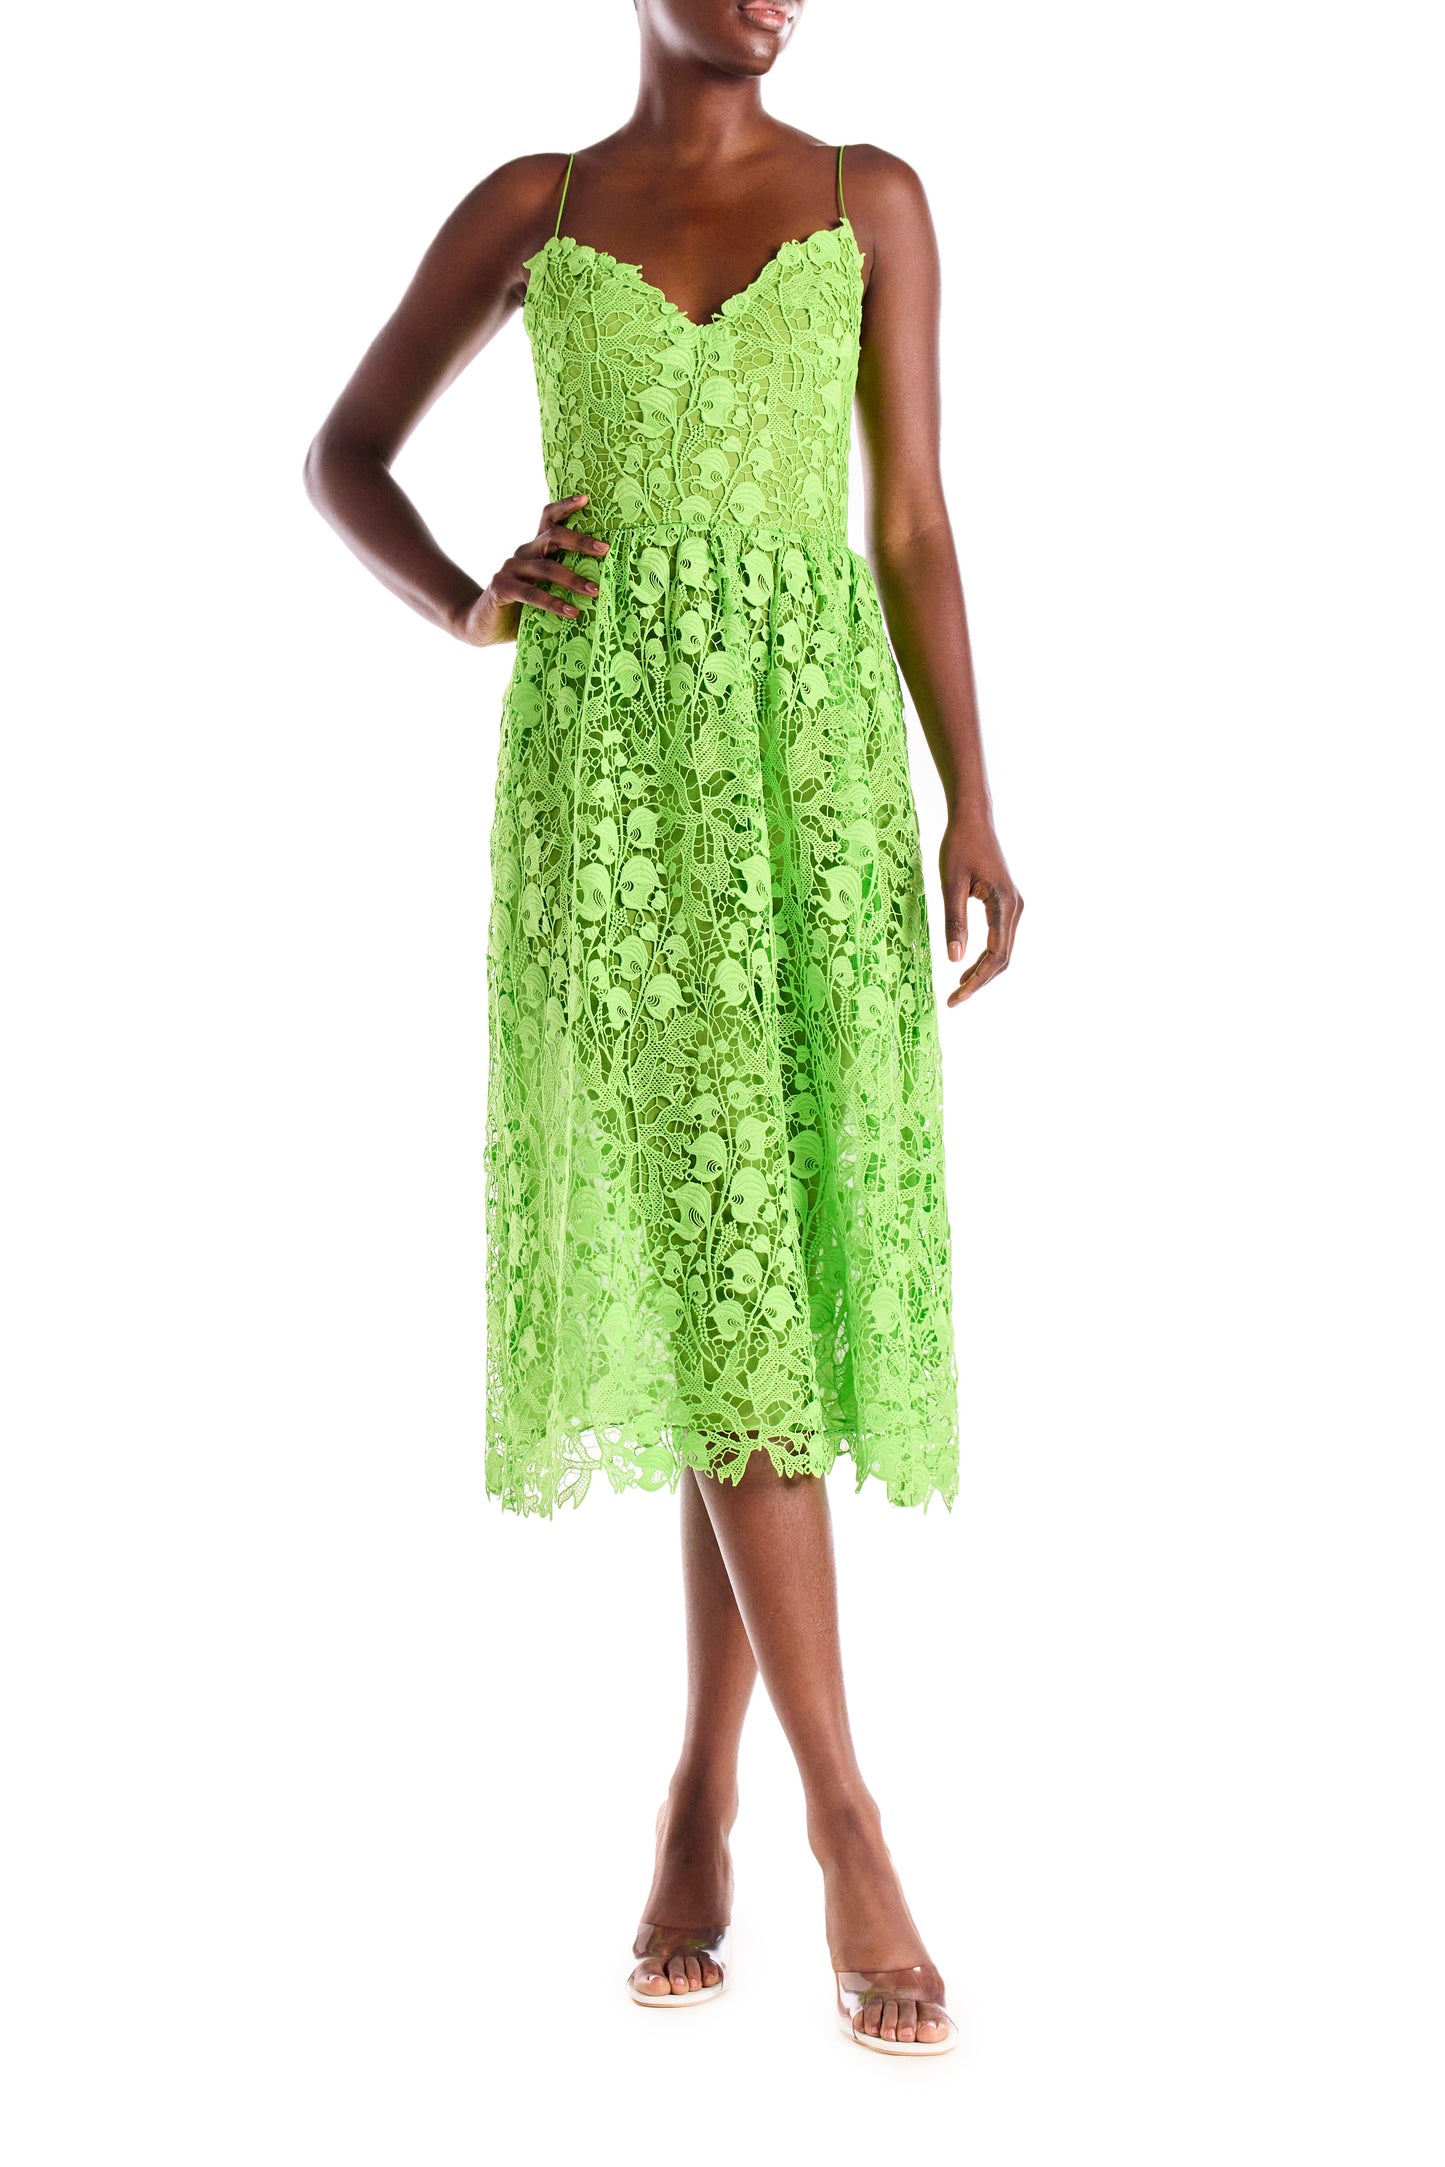 Lime green lace dress with spaghetti straps and midi length.